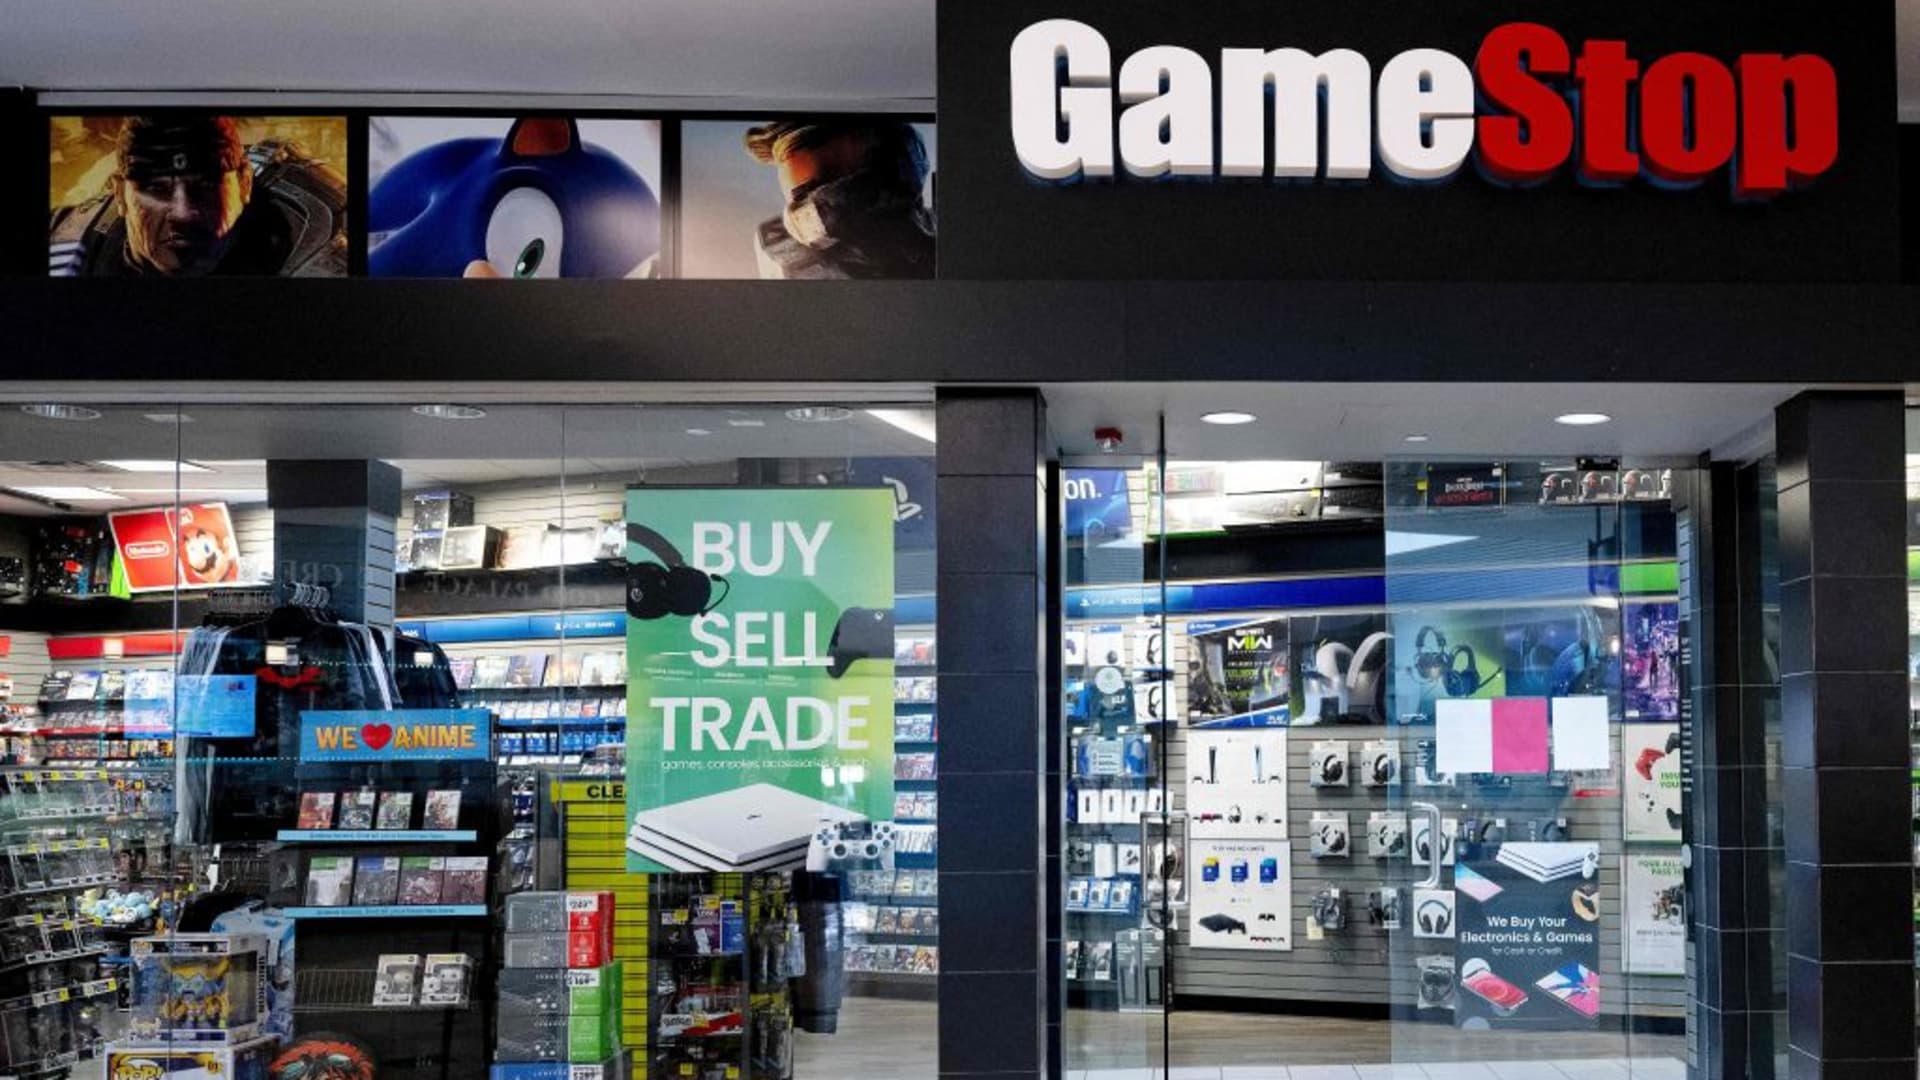 GameStop stock surge, why investors should be wary of ‘meme stocks’ [Video]